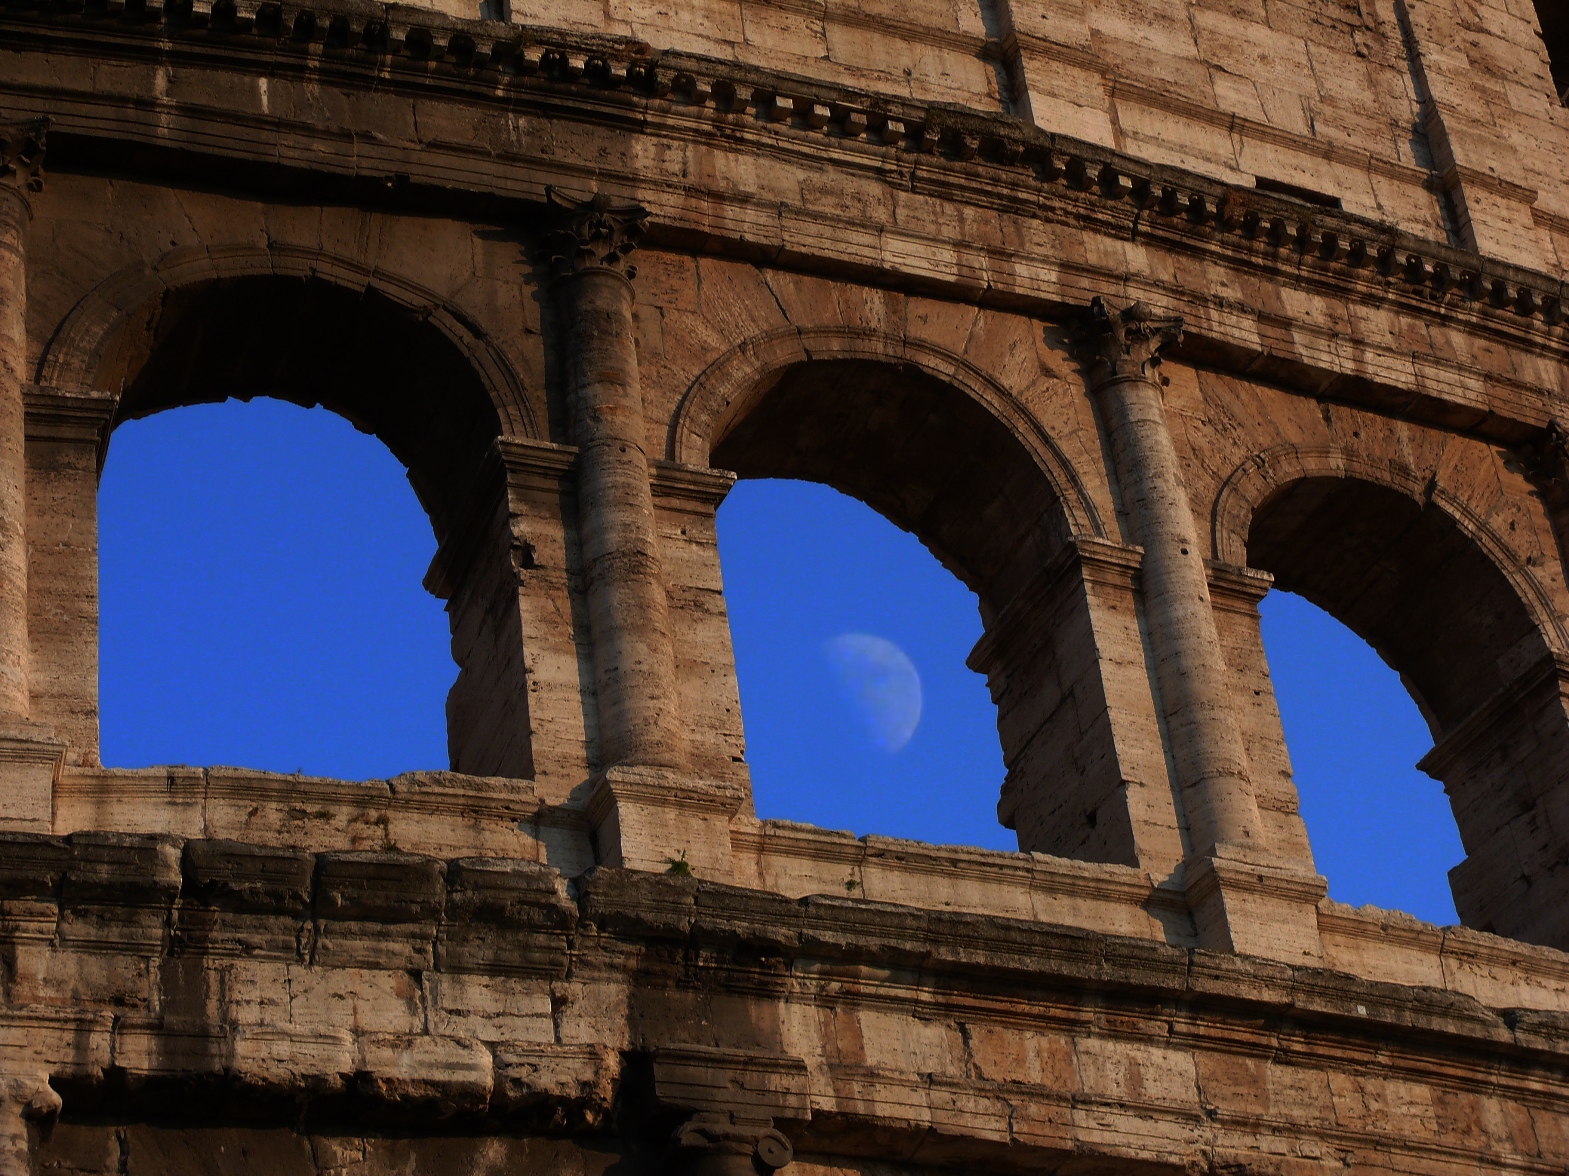 Moon in the Colosseum